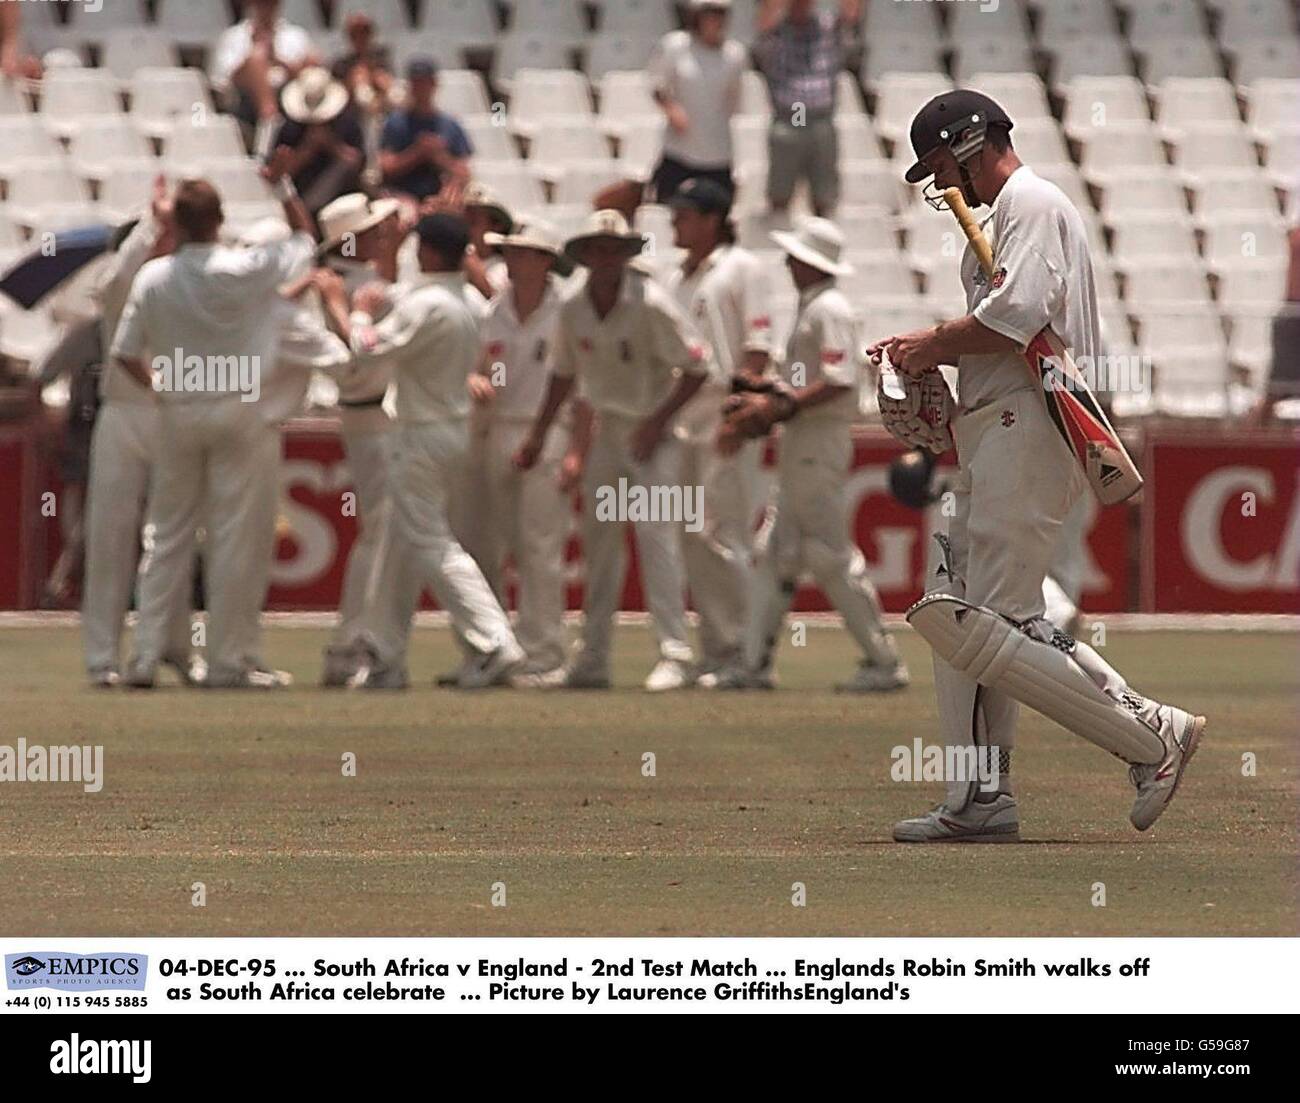 04-DEC-95. South Africa v England - 2nd Test Match. Englands Robin Smith walks off as South Africa celebrate. Picture by Laurence GriffithsEngland's Stock Photo